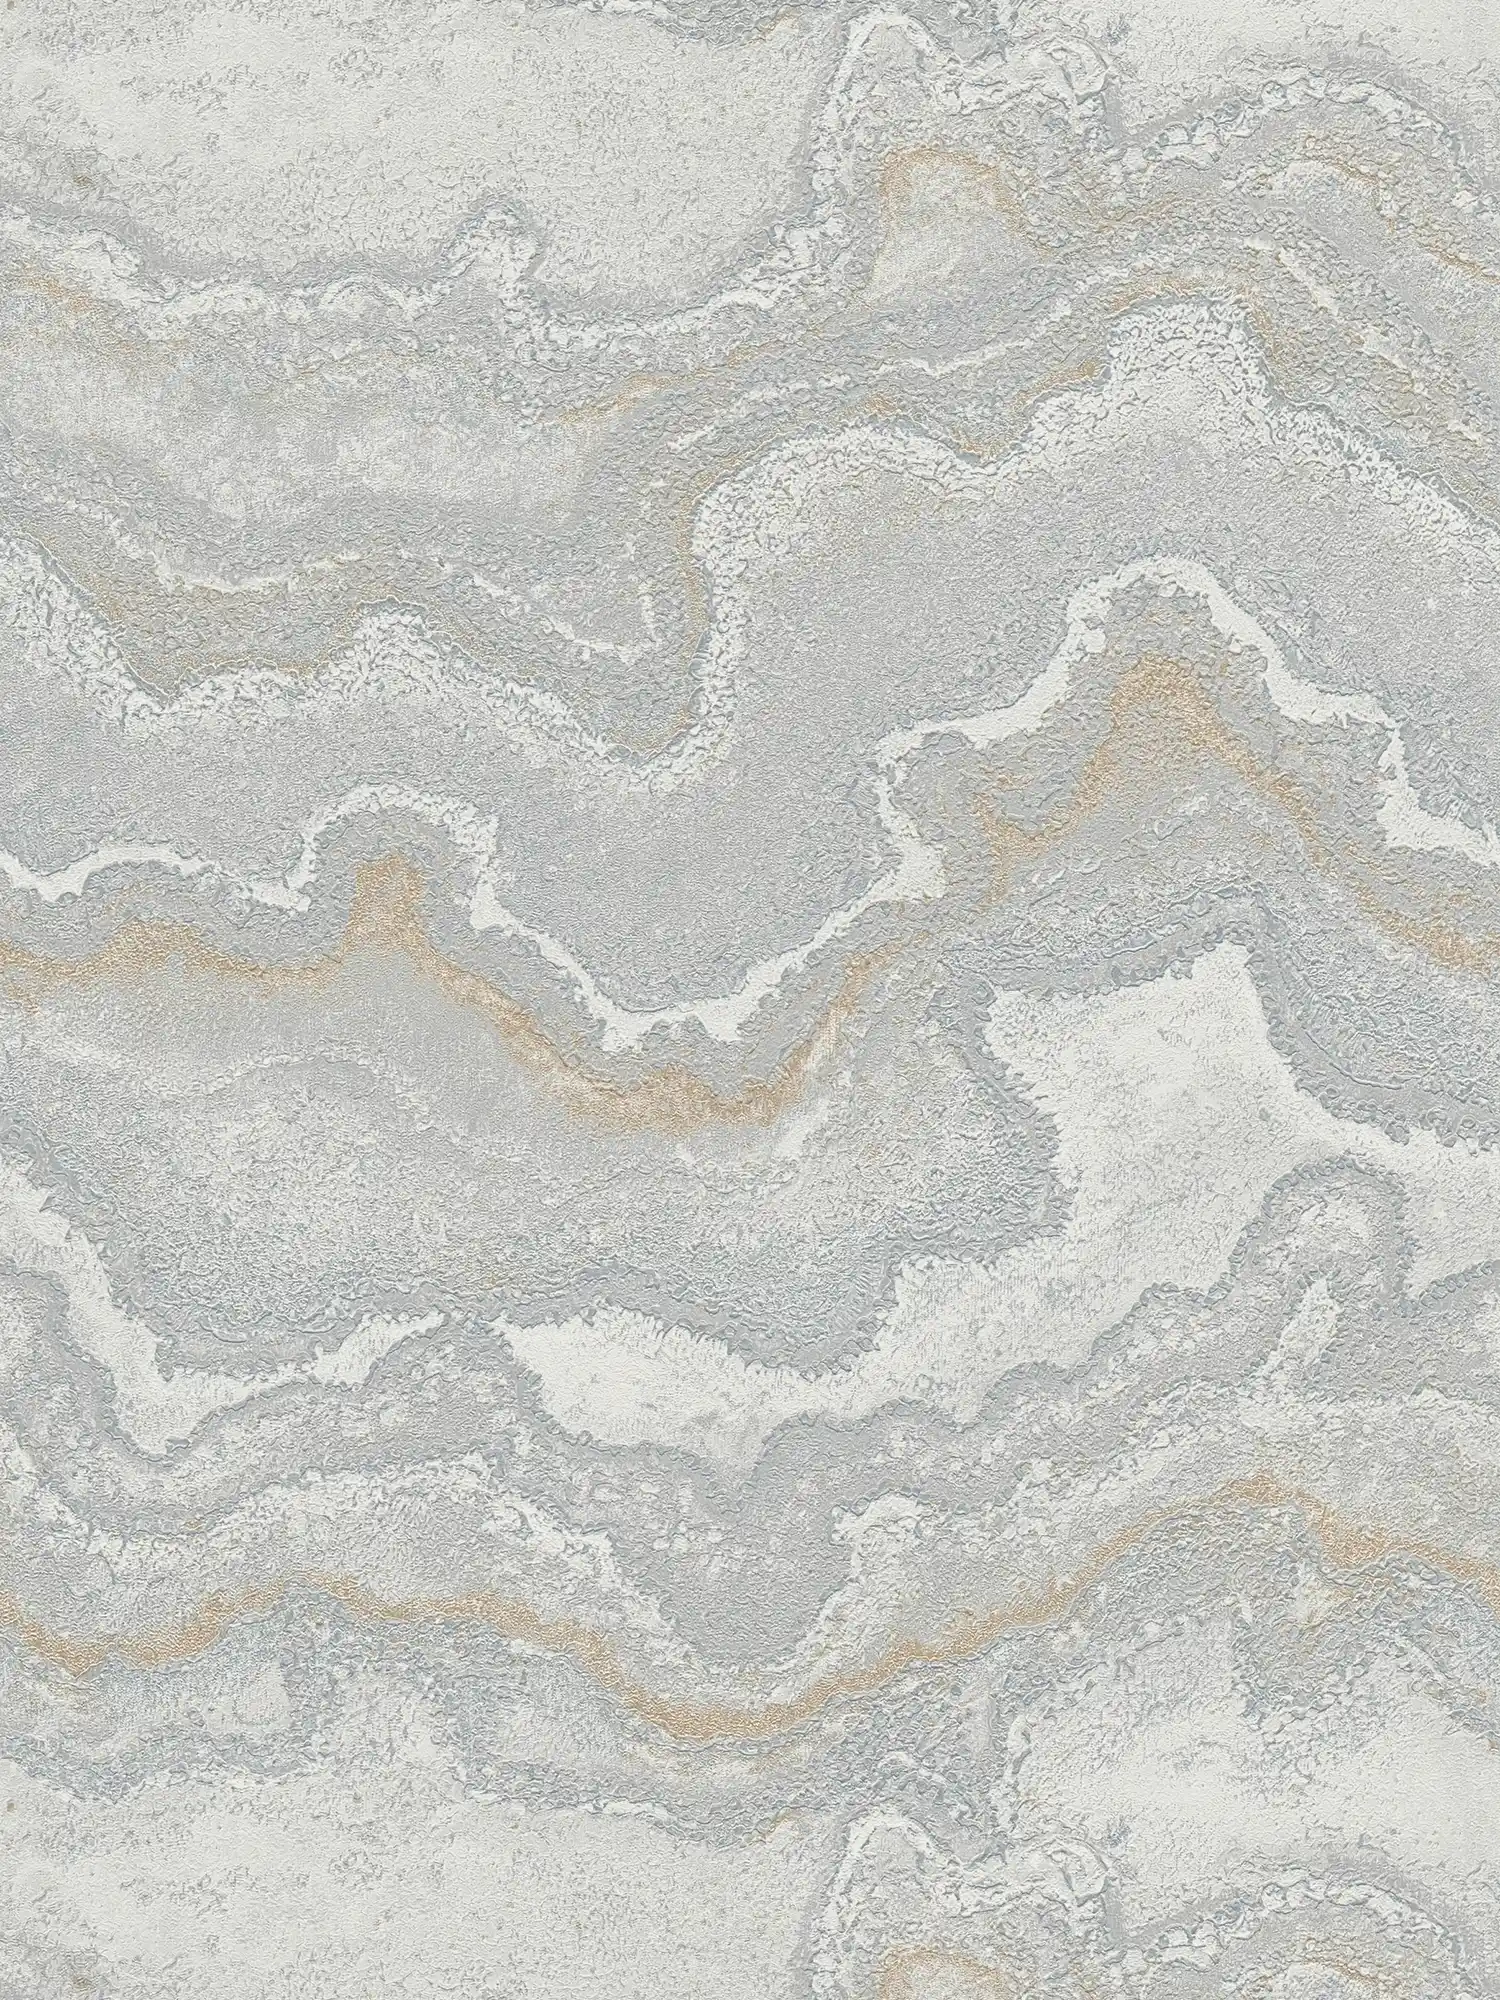 Non-woven wallpaper with marble pattern - grey, silver, gold
